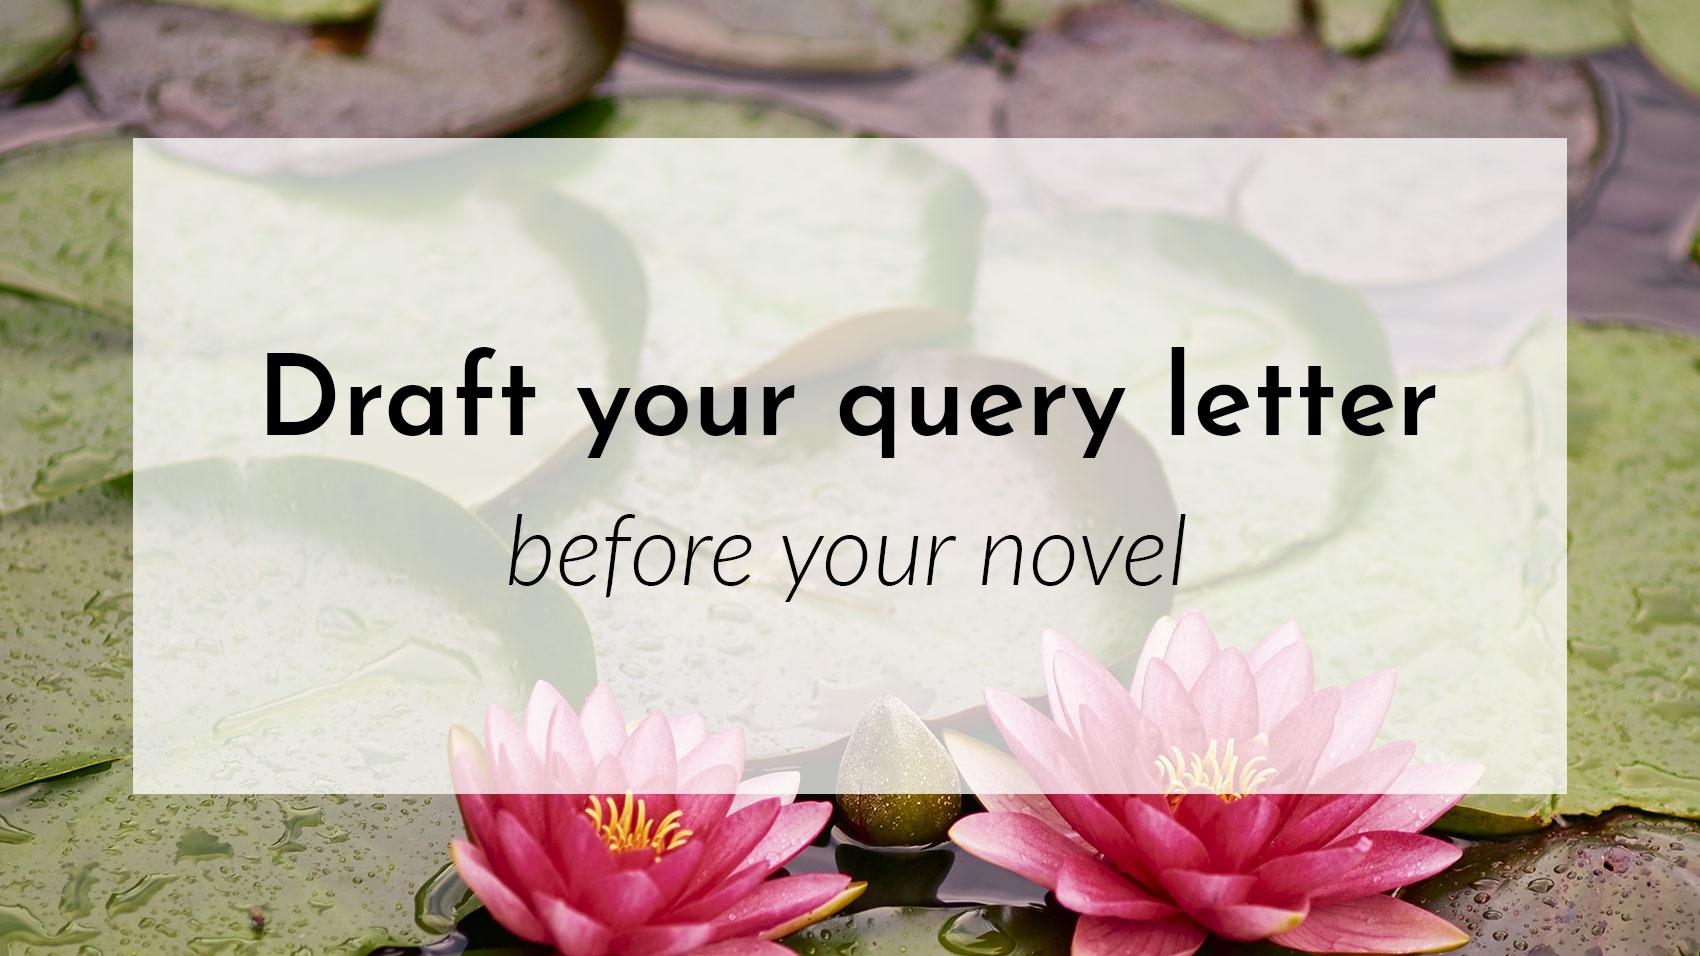 Draft your query letter before your novel